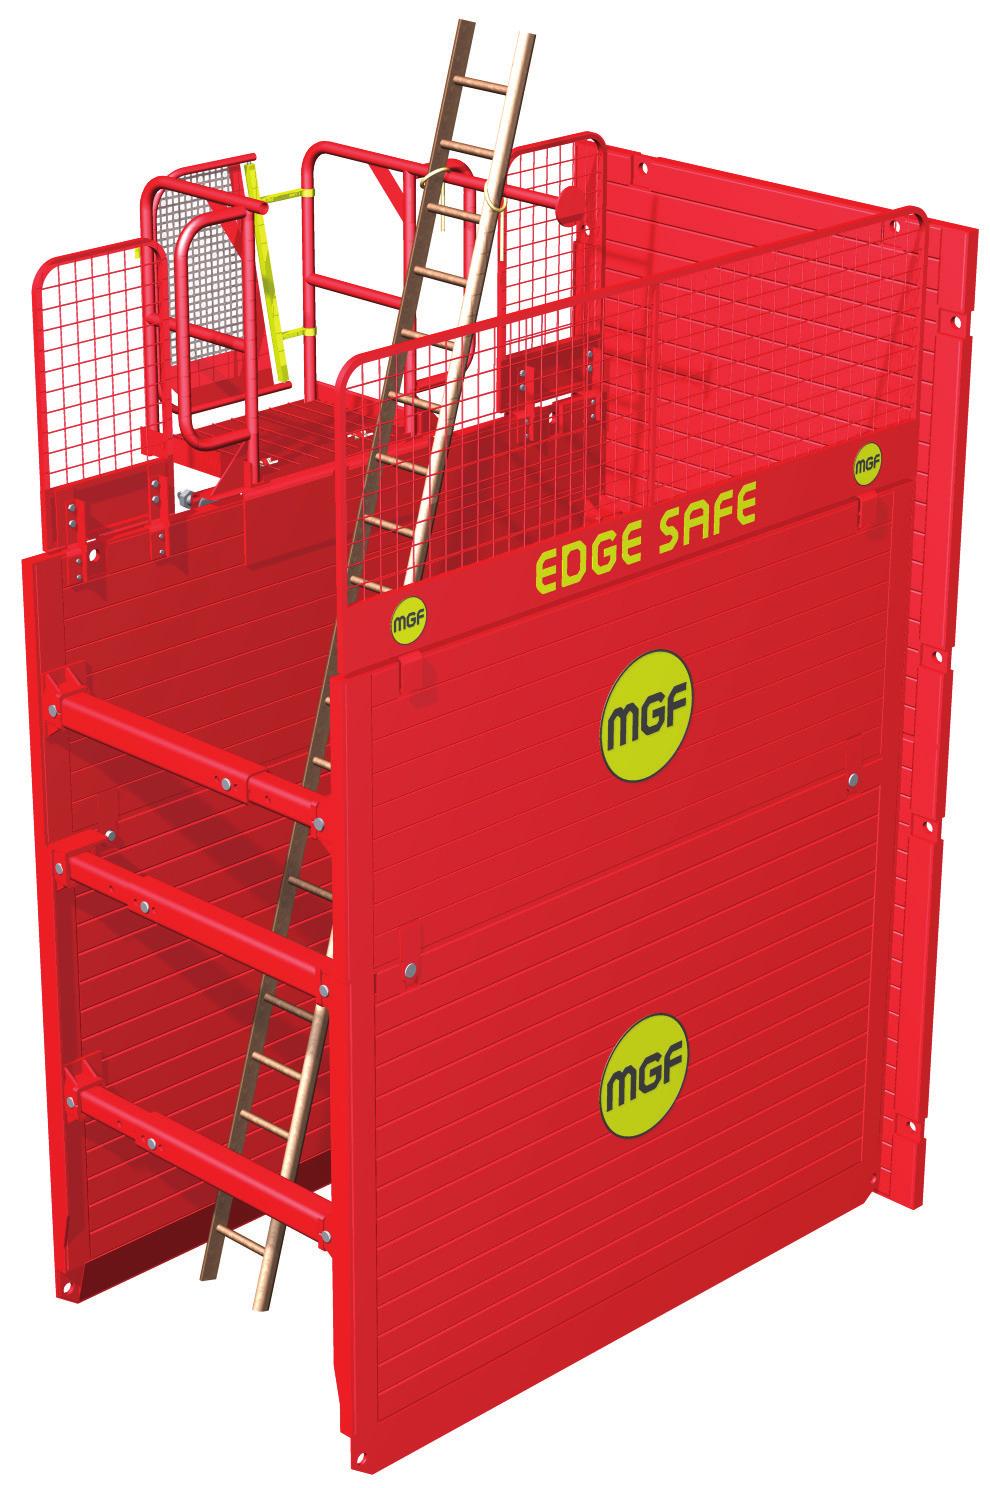 MGF TECHNICAL FILE MGF Edgesafe - See Section 6 MGF Laddersafe - See Section 6 MGF Pole